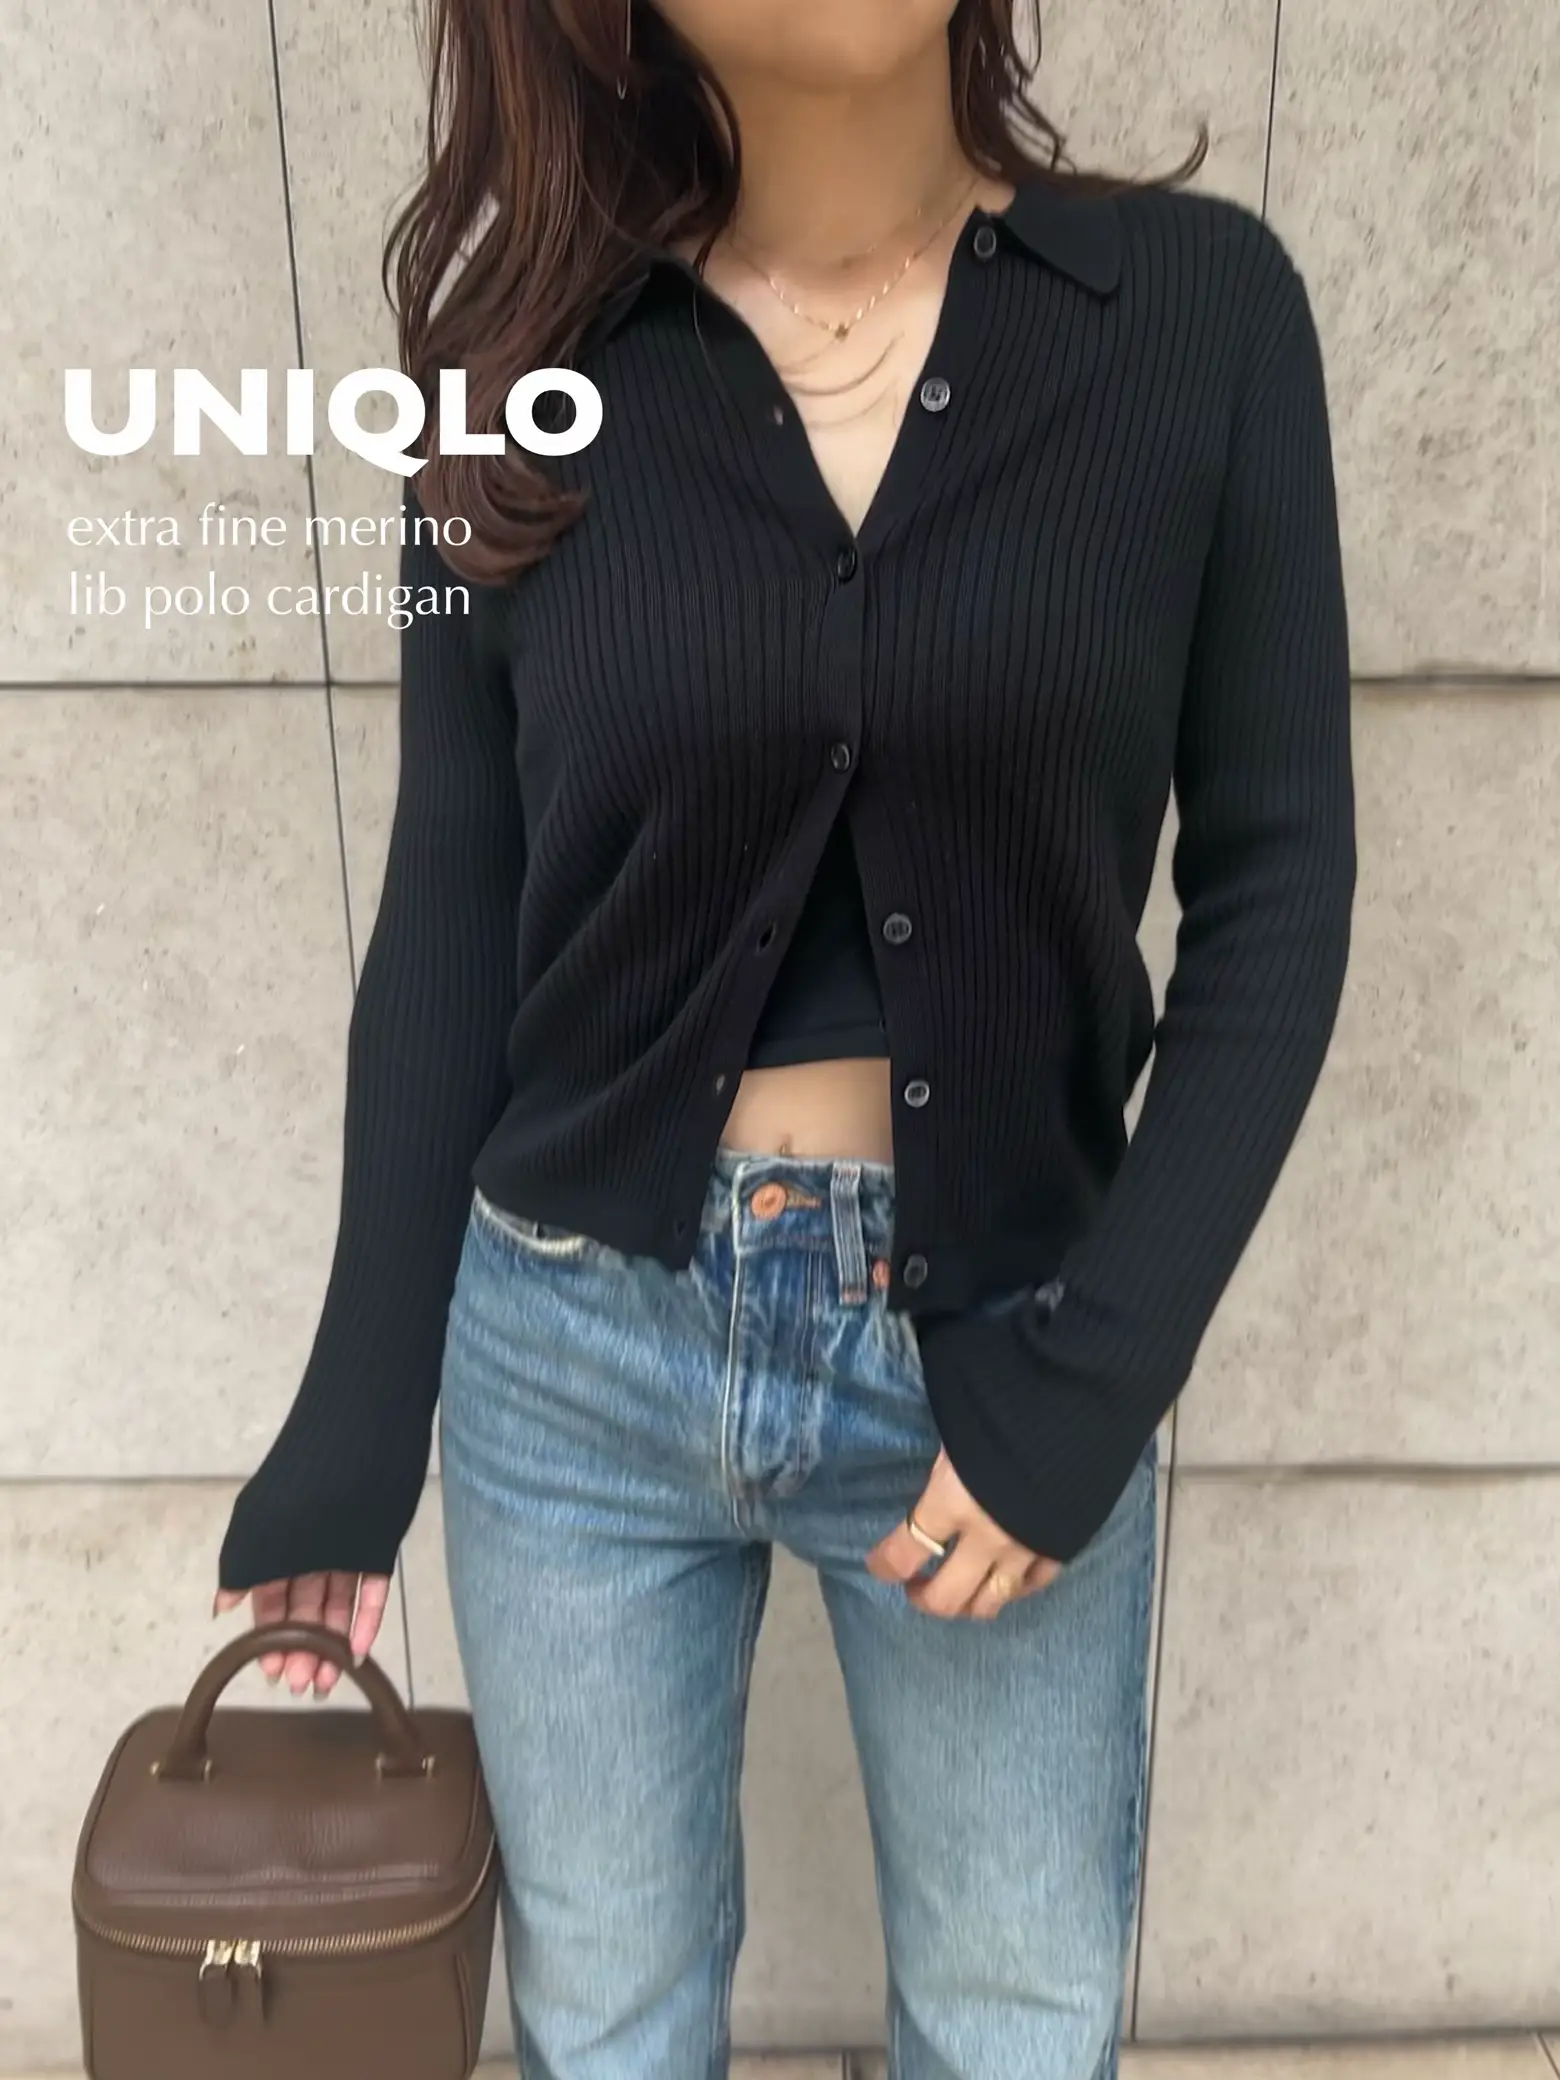 UNIQLO 】 With a collar is now-like 🖤 delicate looking knit ahead